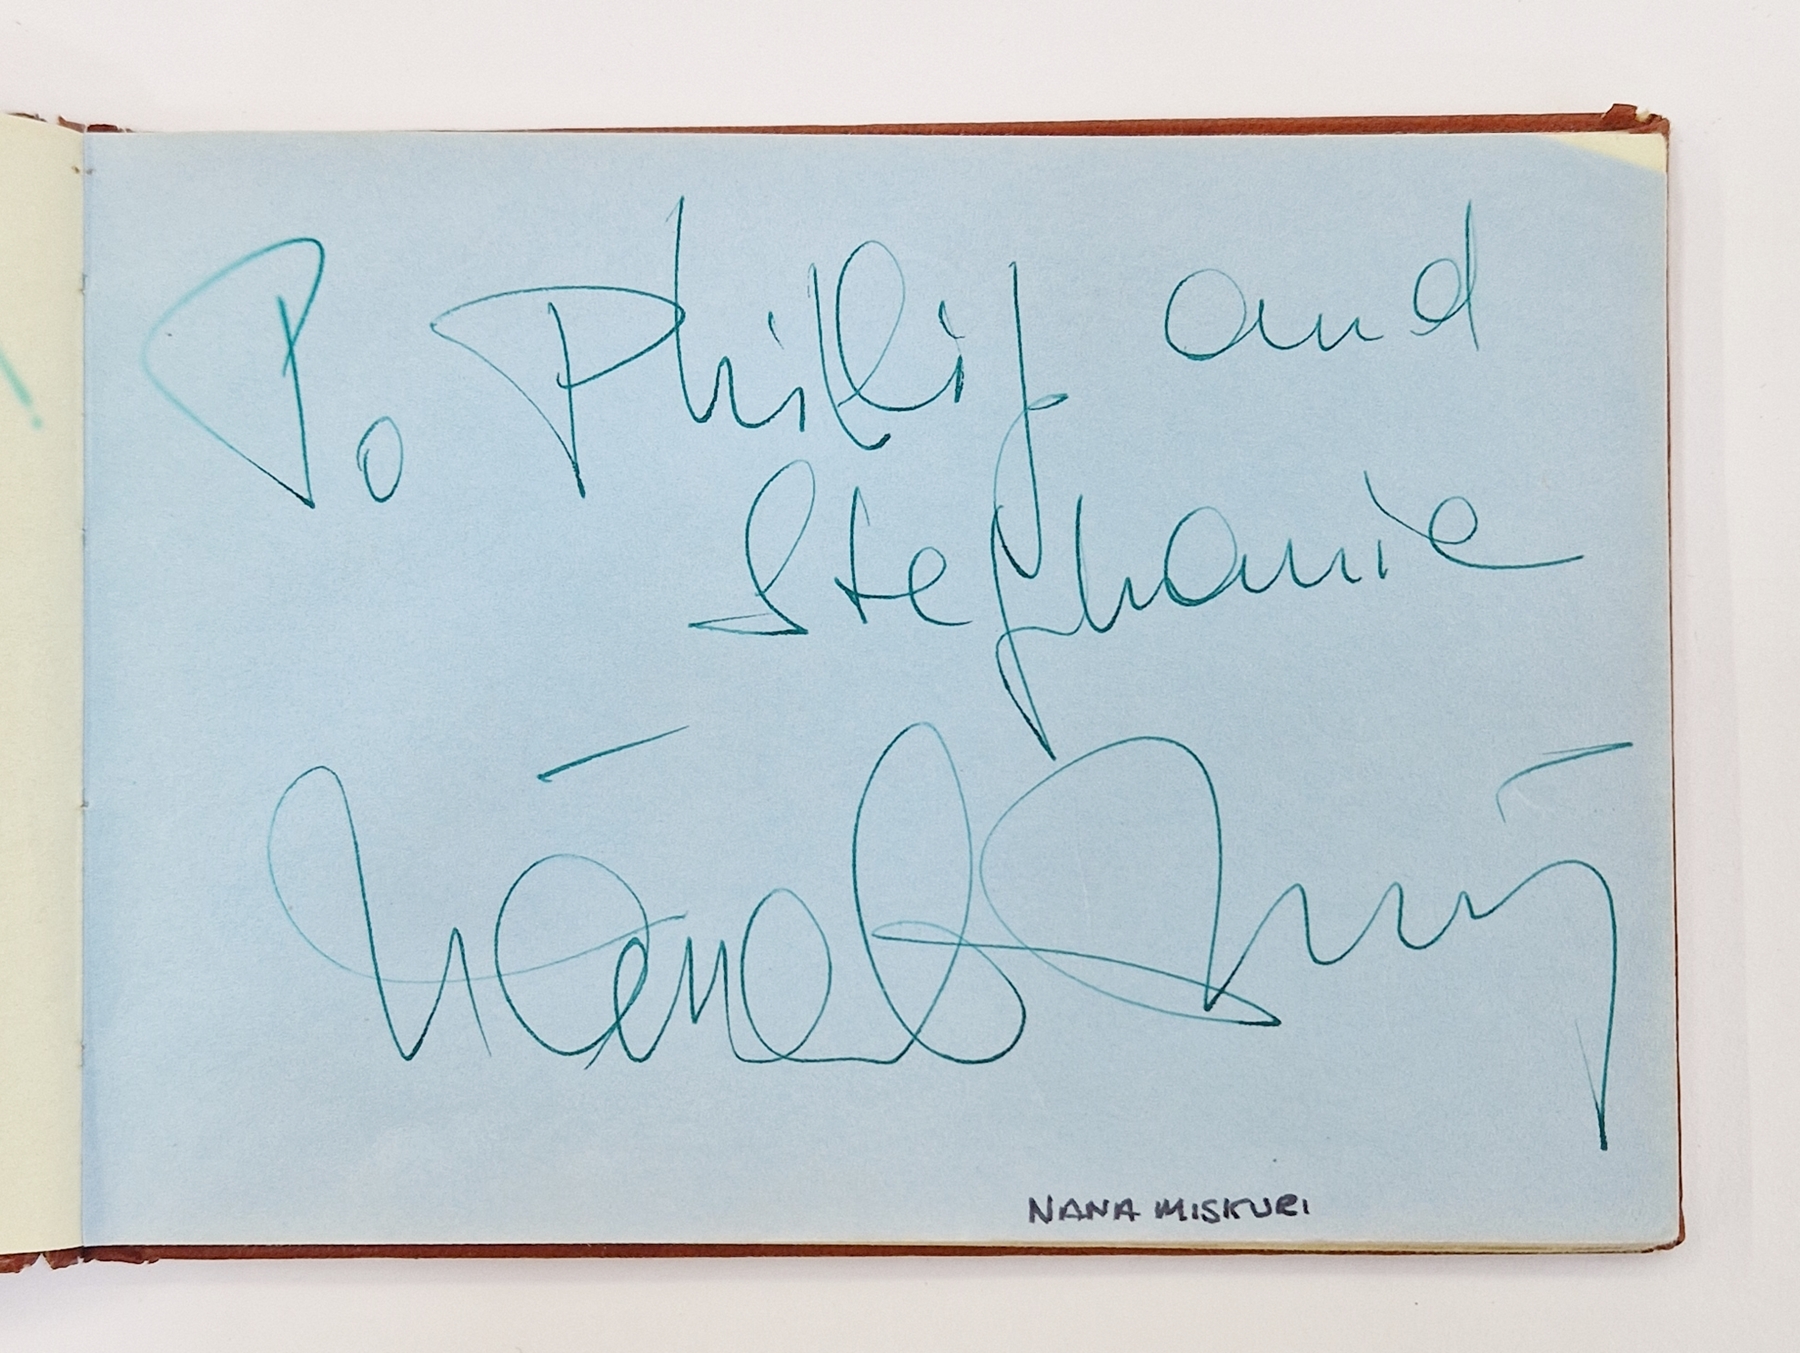 Autograph album, 20th century, to include actors, singers and other celebrities, including Elton - Image 7 of 20